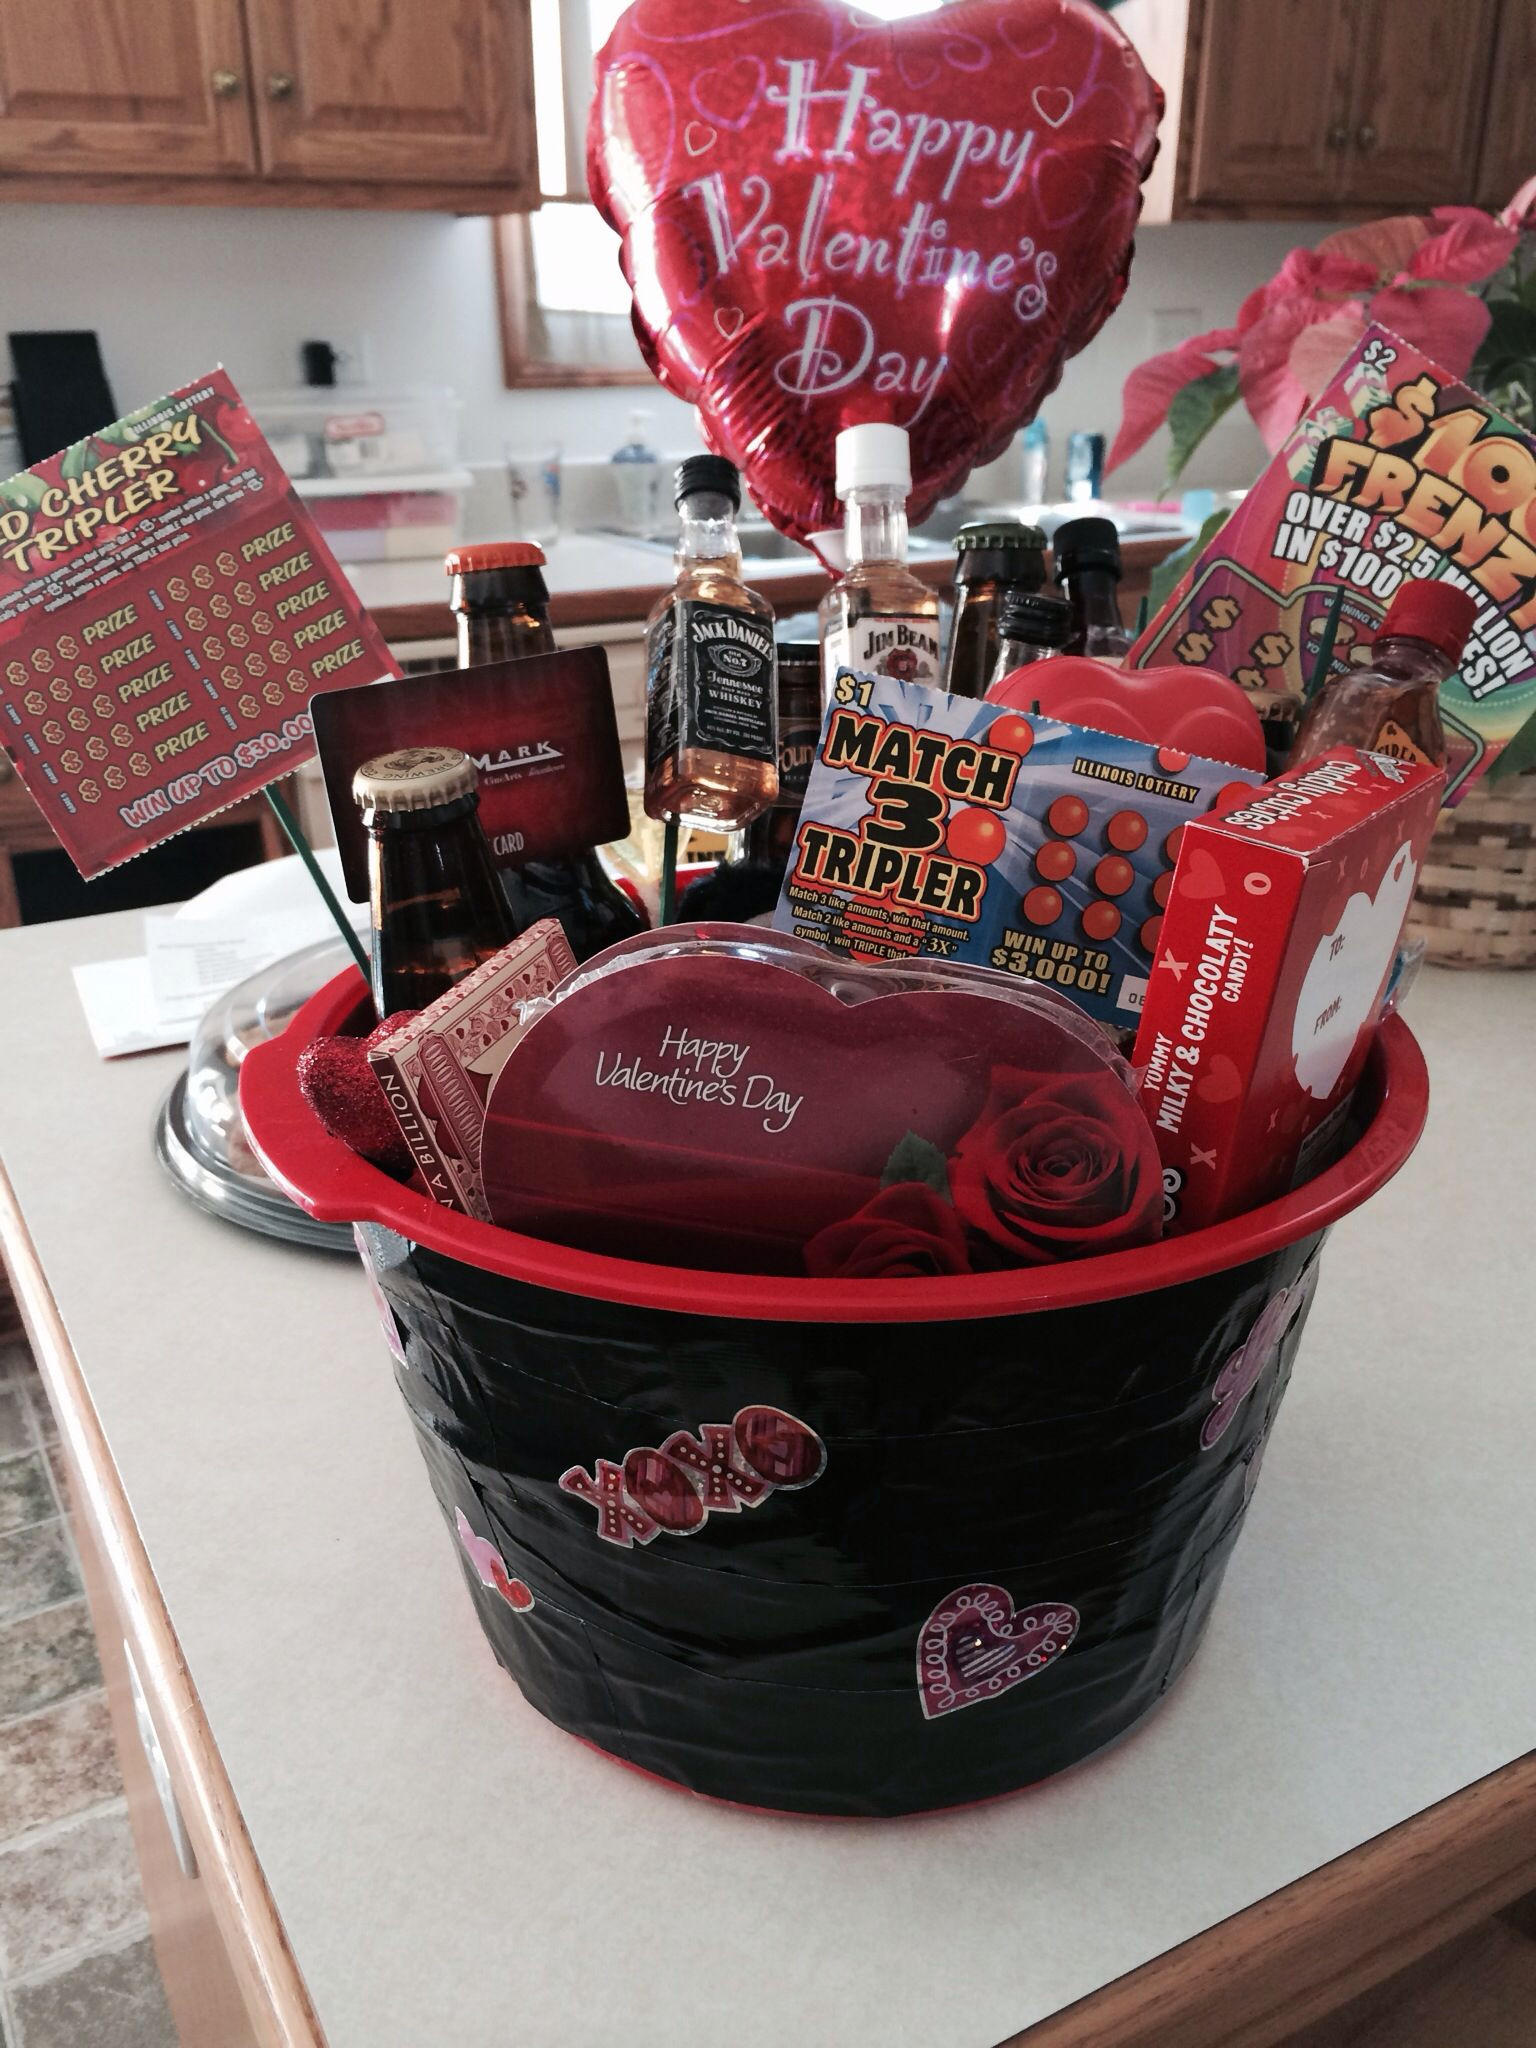 Valentine'S Day Gift Basket Ideas For Him
 Valentines day basket for him I used 6 IPA beers